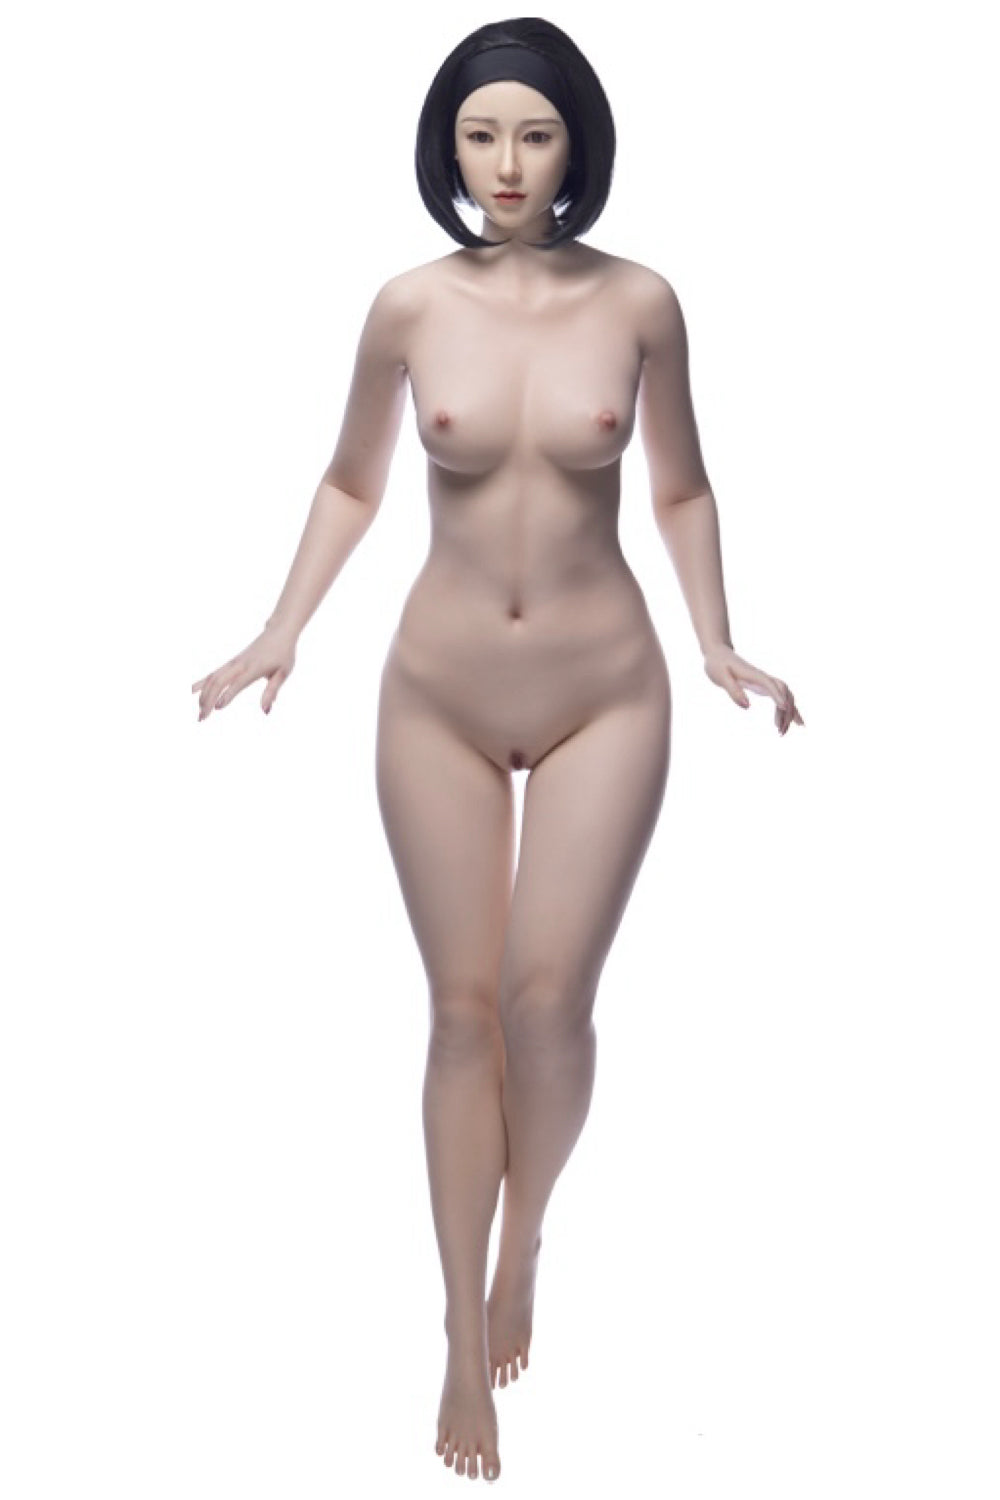 166cm- I C-Cup - housedoll - Sexroboter kaufen - Sexpuppe kaufen - Sexpuppe mieten Berlin - Günstige Sexpuppen